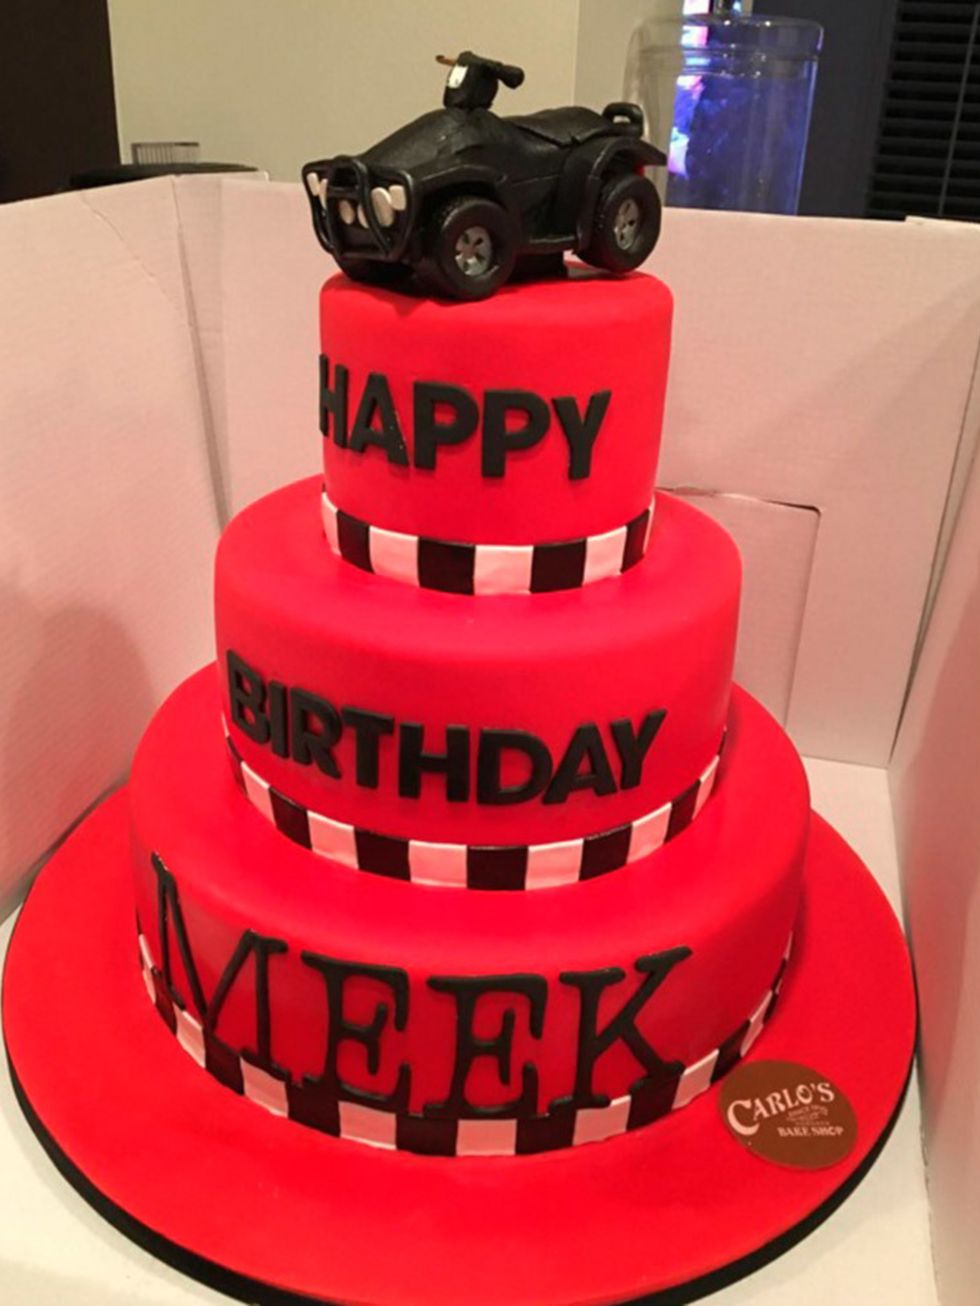 <p>Nicki Minaj posted a snap of the cake she bought for Meek Mill&#39;s birthday on Instagram...</p>

<p>&#39;This was his other cake. I asked for a 4 wheeler make out of CAKE!!!! They gave me a top hat with a tiny 4 wheeler on top of it. I just been look